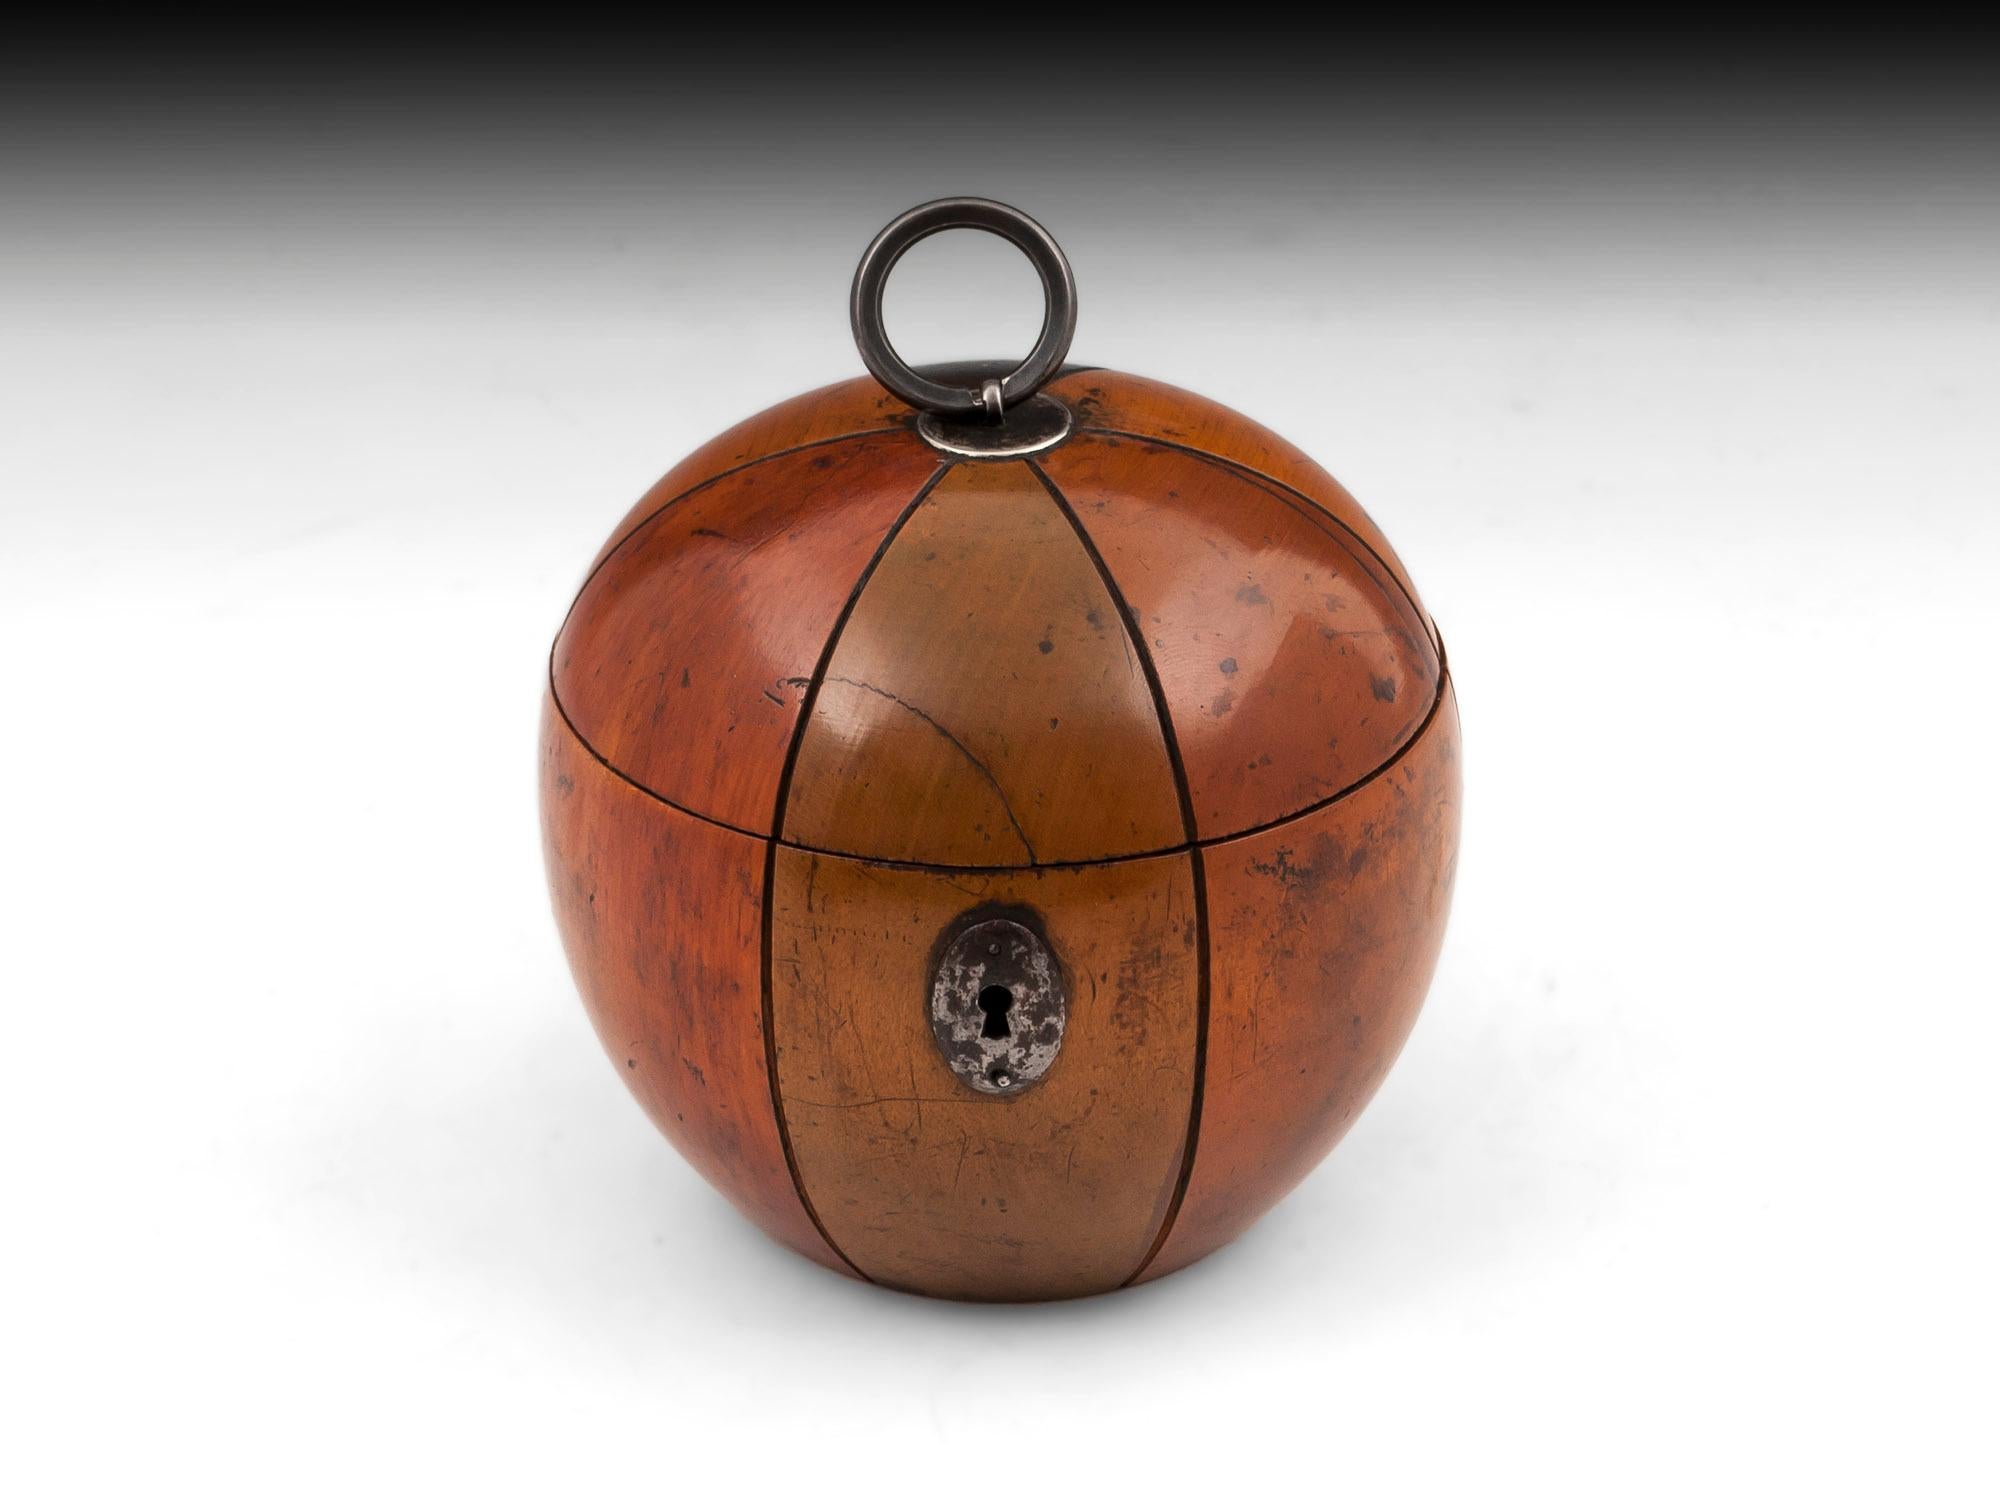 Unusual Melon shaped tea caddy with colored segments. With cut steel escutcheon, lock, hinge and ring handle. 

This rare fruit tea caddy comes with a fully working lock and tasselled key.